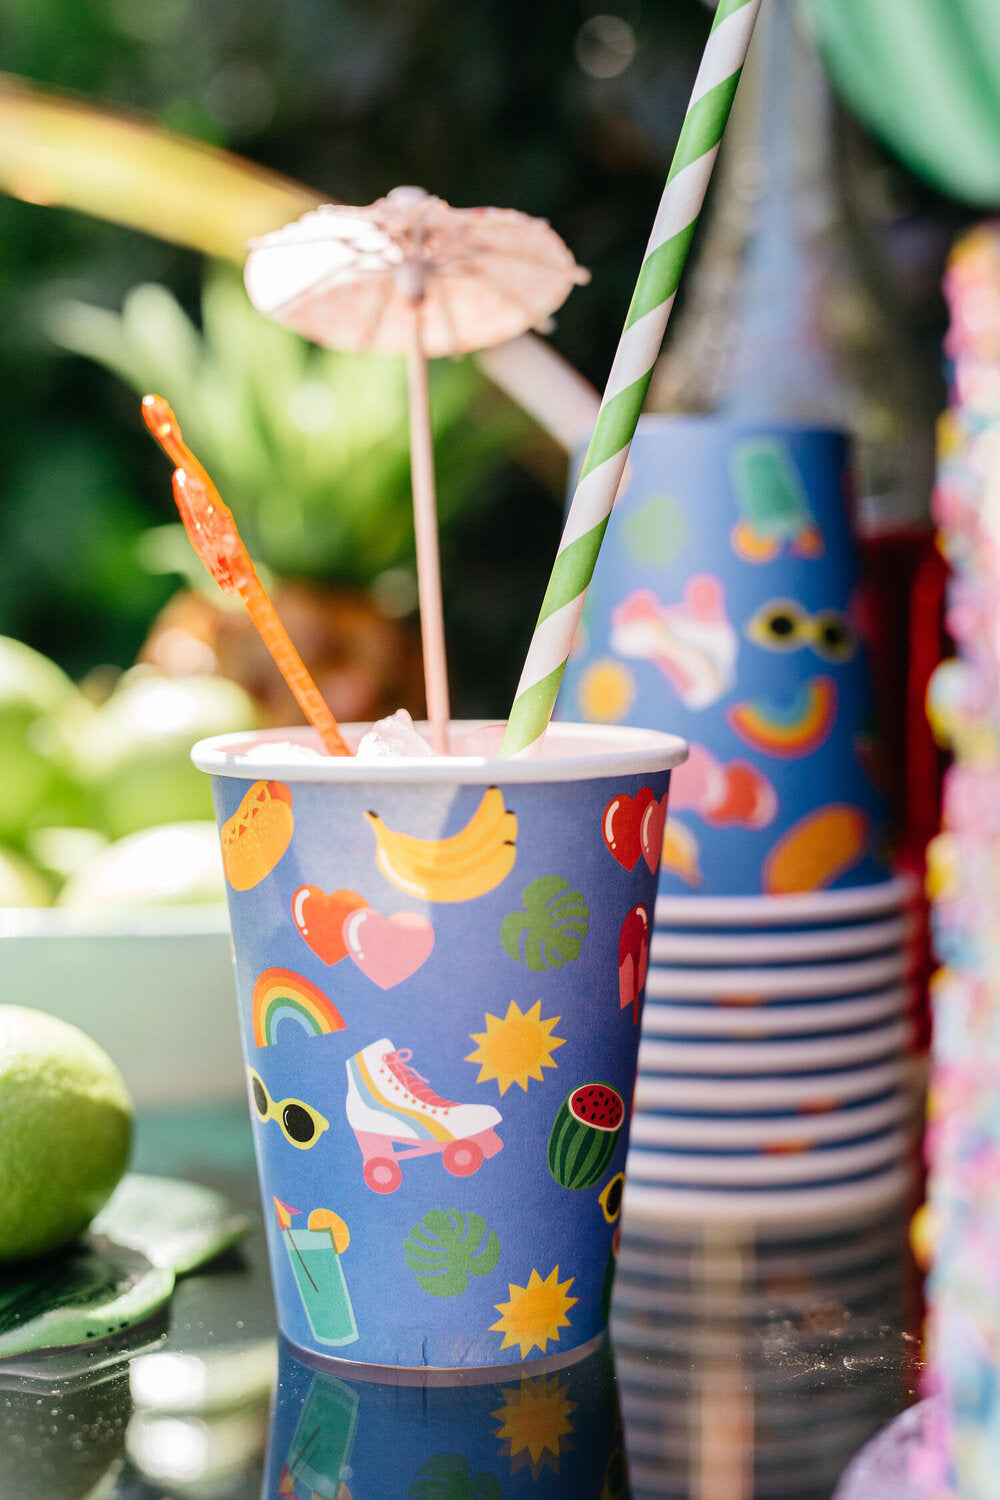 A collection of vibrant partyware in a party setting. The partyware includes plates, cups, party bags and piñatas and features a blue background, with tropical illustrated motifs. 